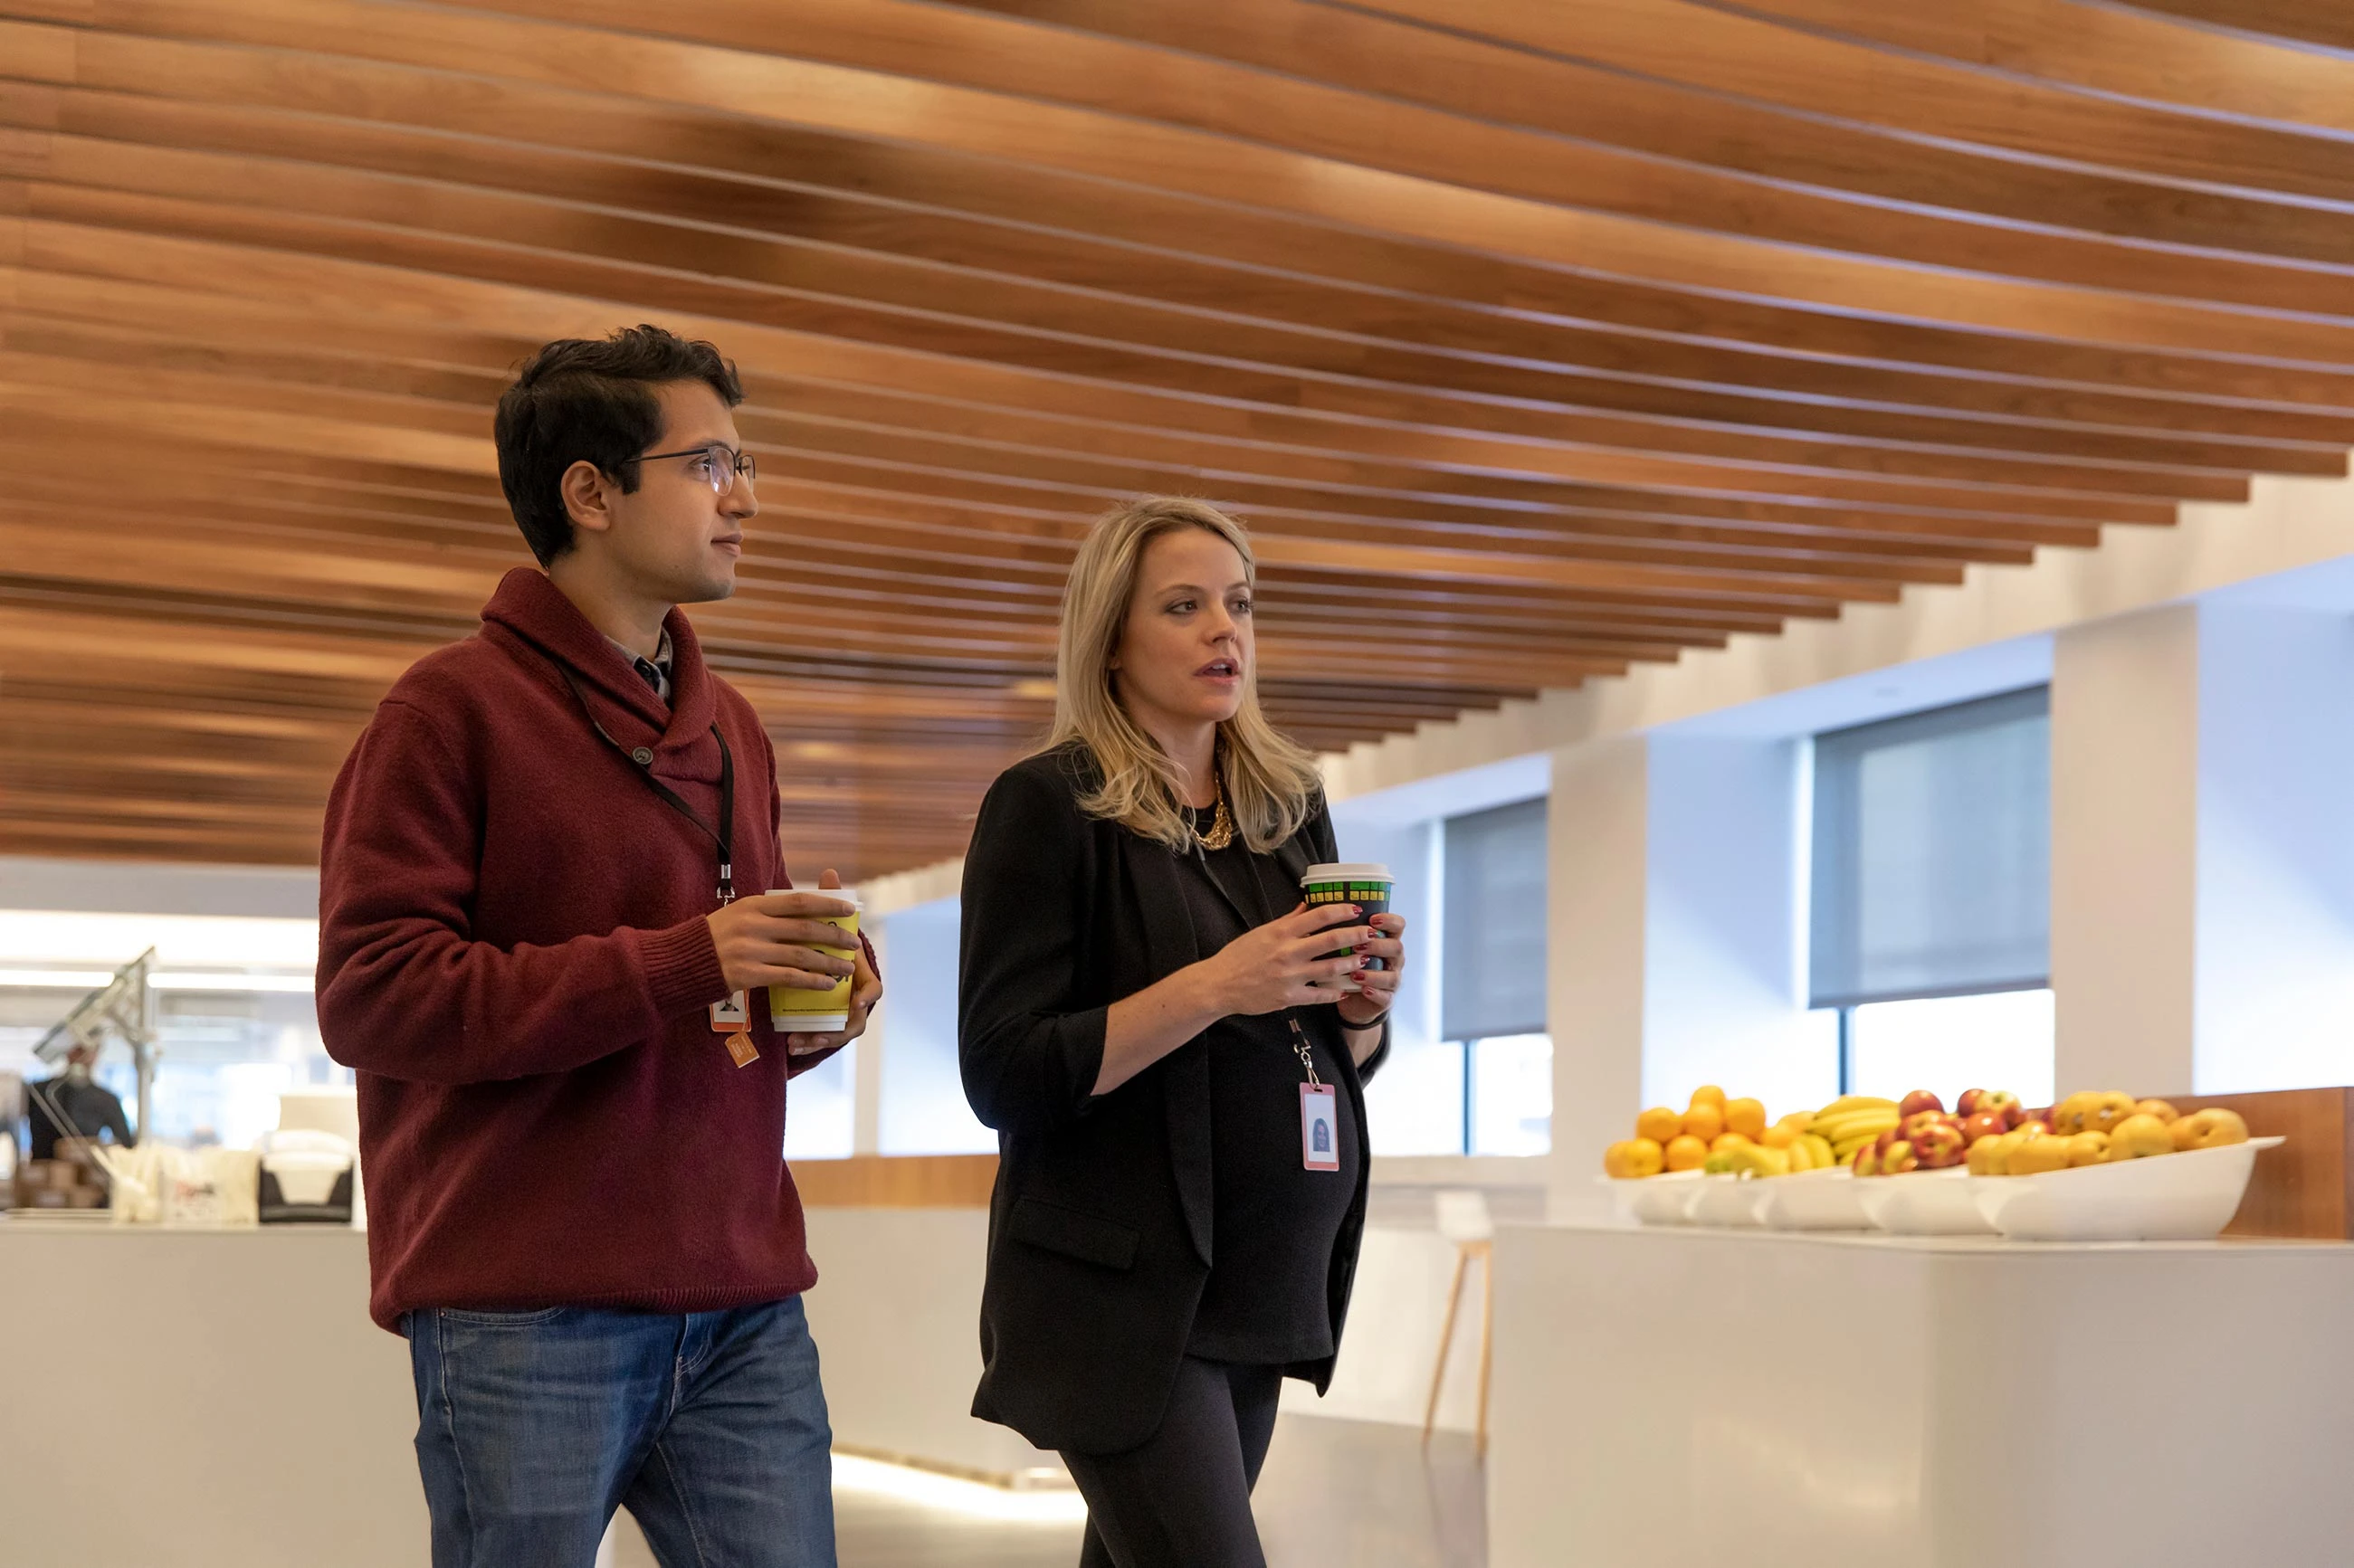 Two Bloomberg employees, one of them pregnant, discuss a project while walking through the office with warm drinks.